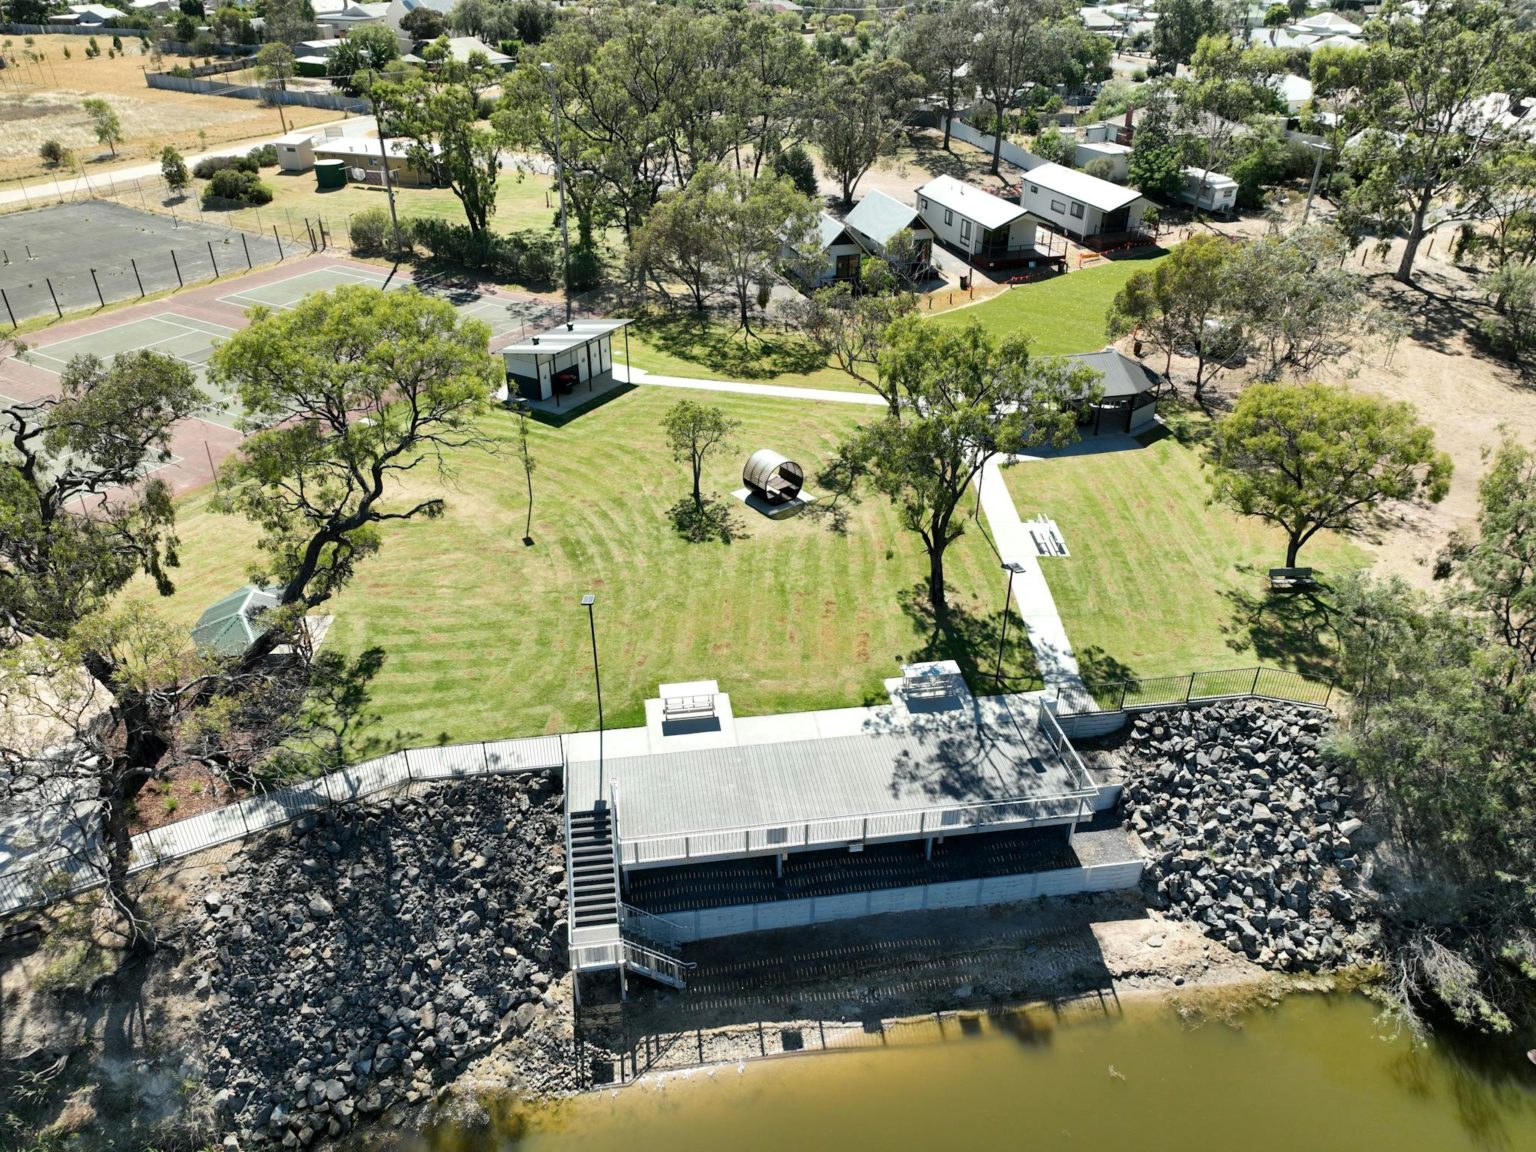 aerial view of river with grassed picnic area with cabins in background